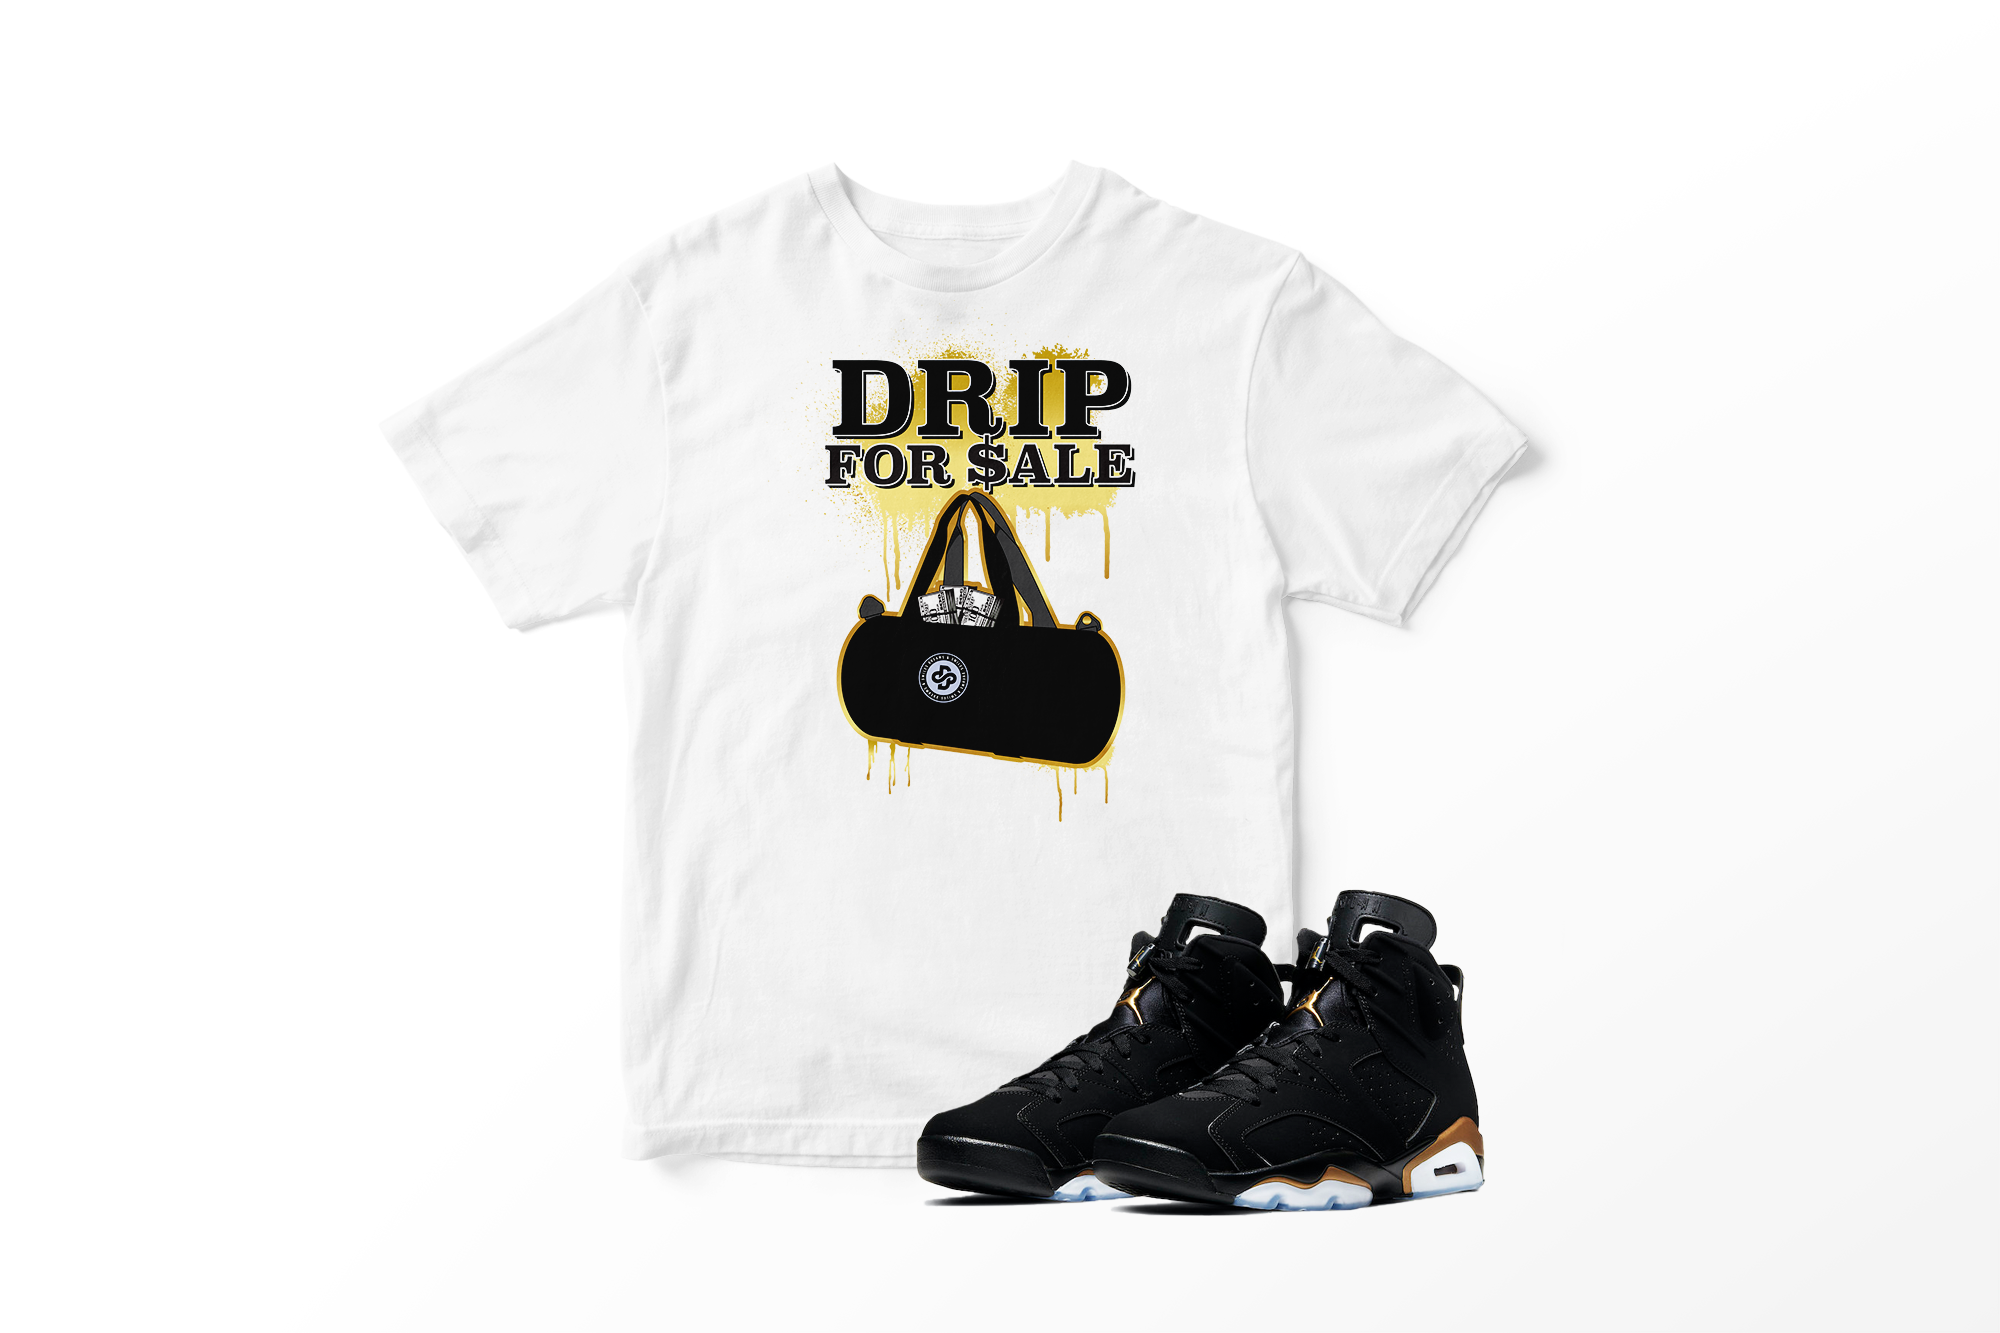 'Drip For Sale' in DMP CW Short Sleeve Tee